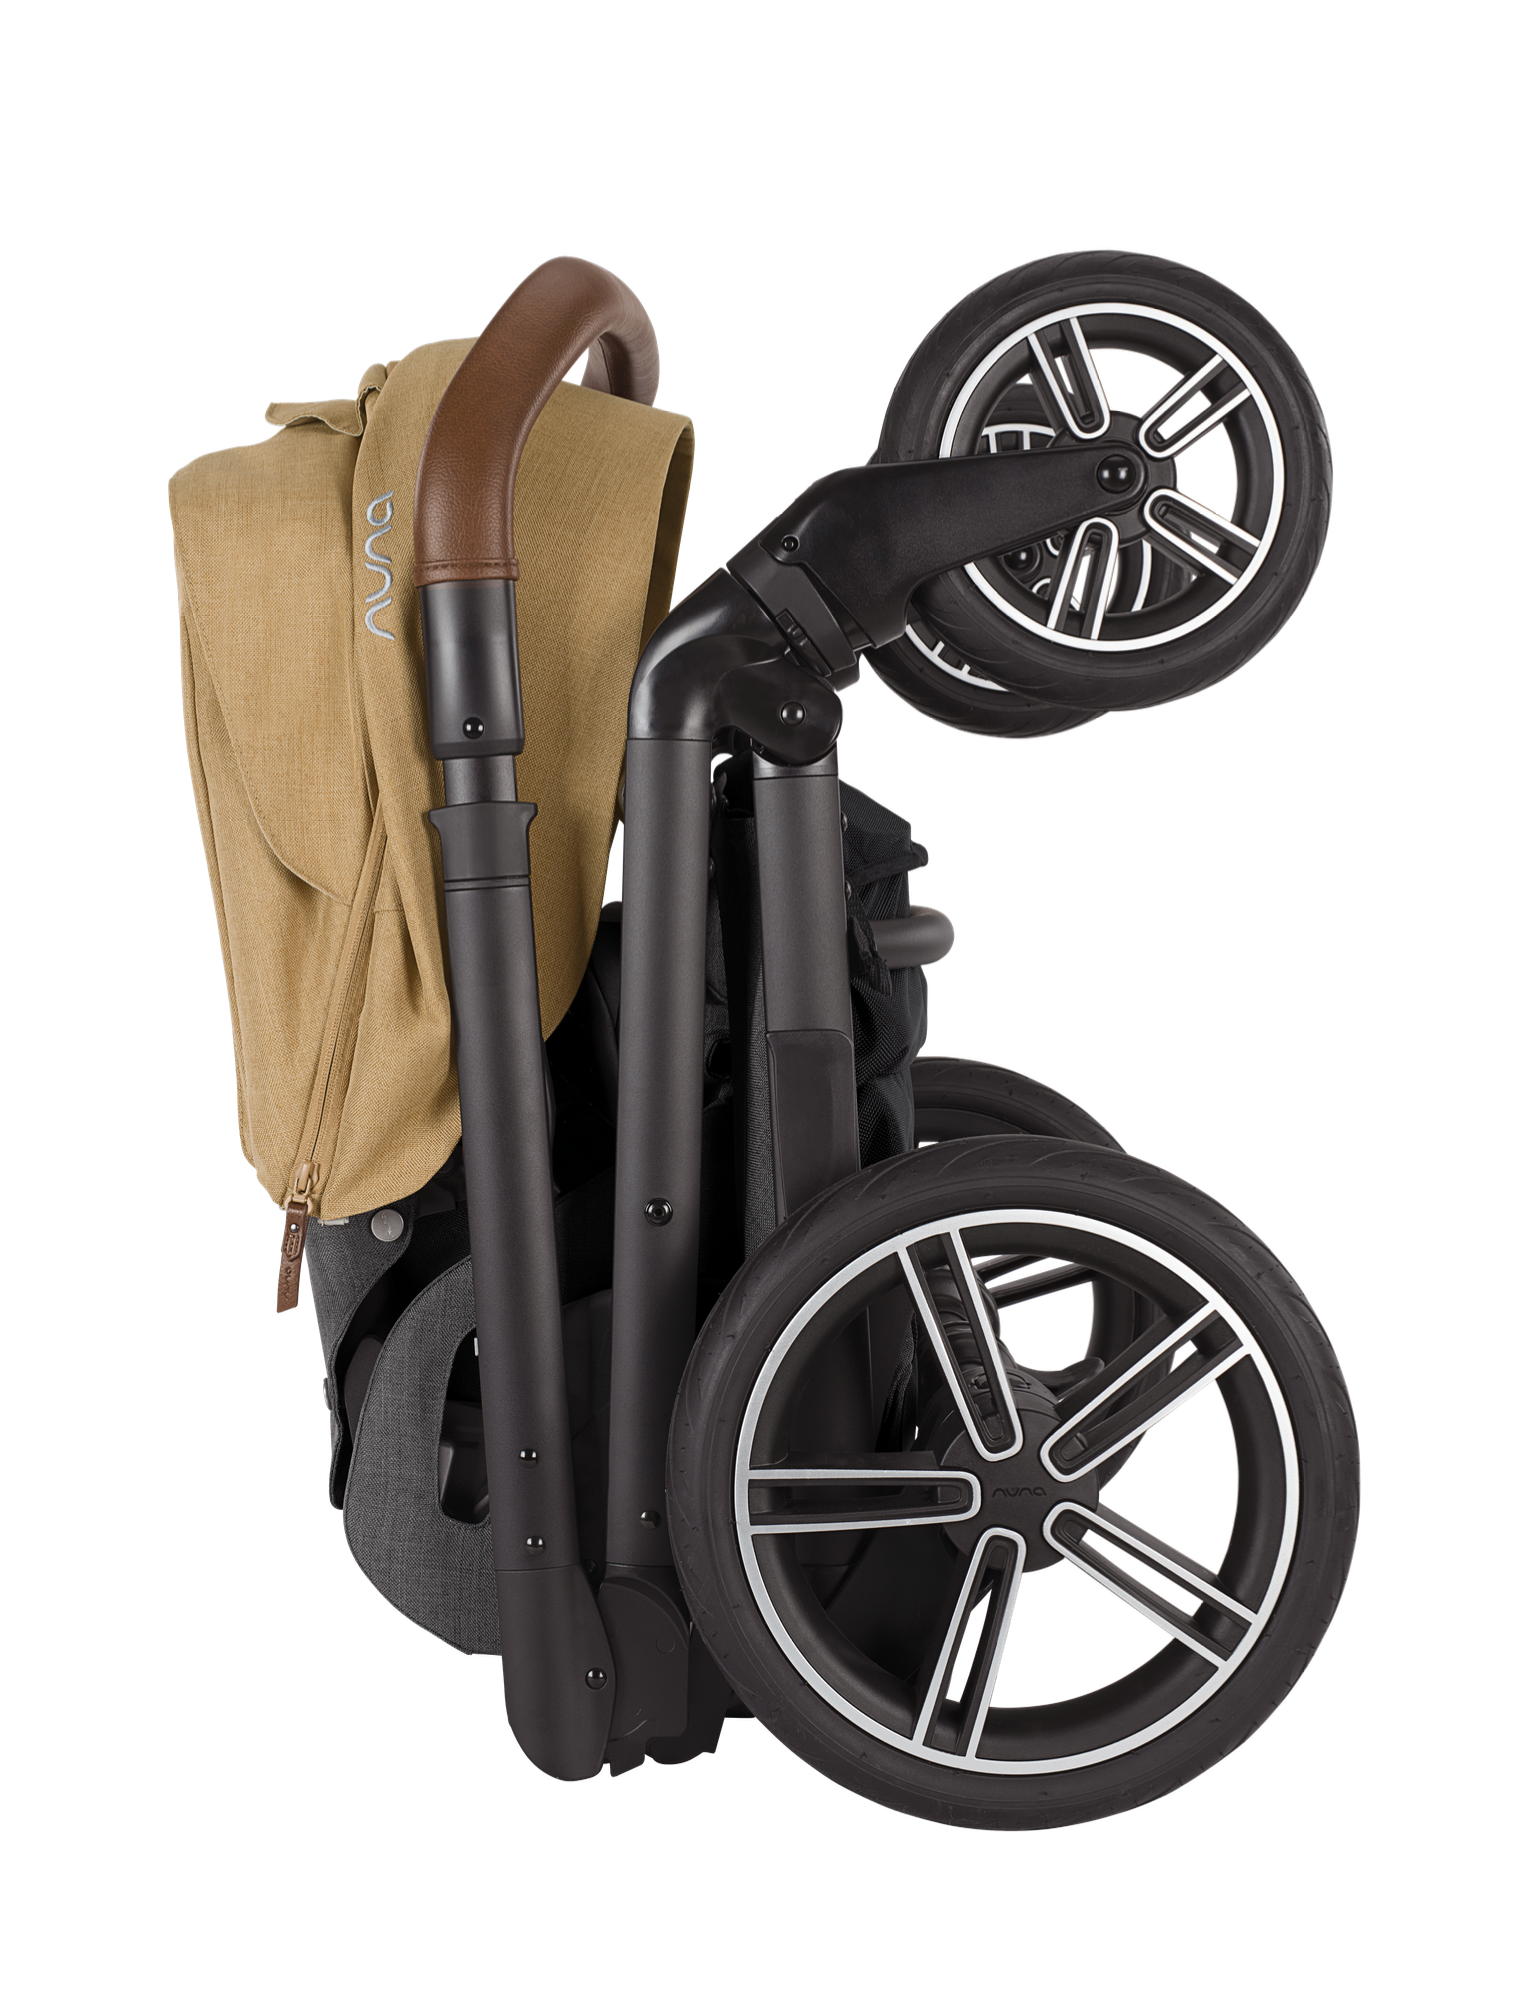 Mixx Next Stroller with Magnetic Buckle - Camel